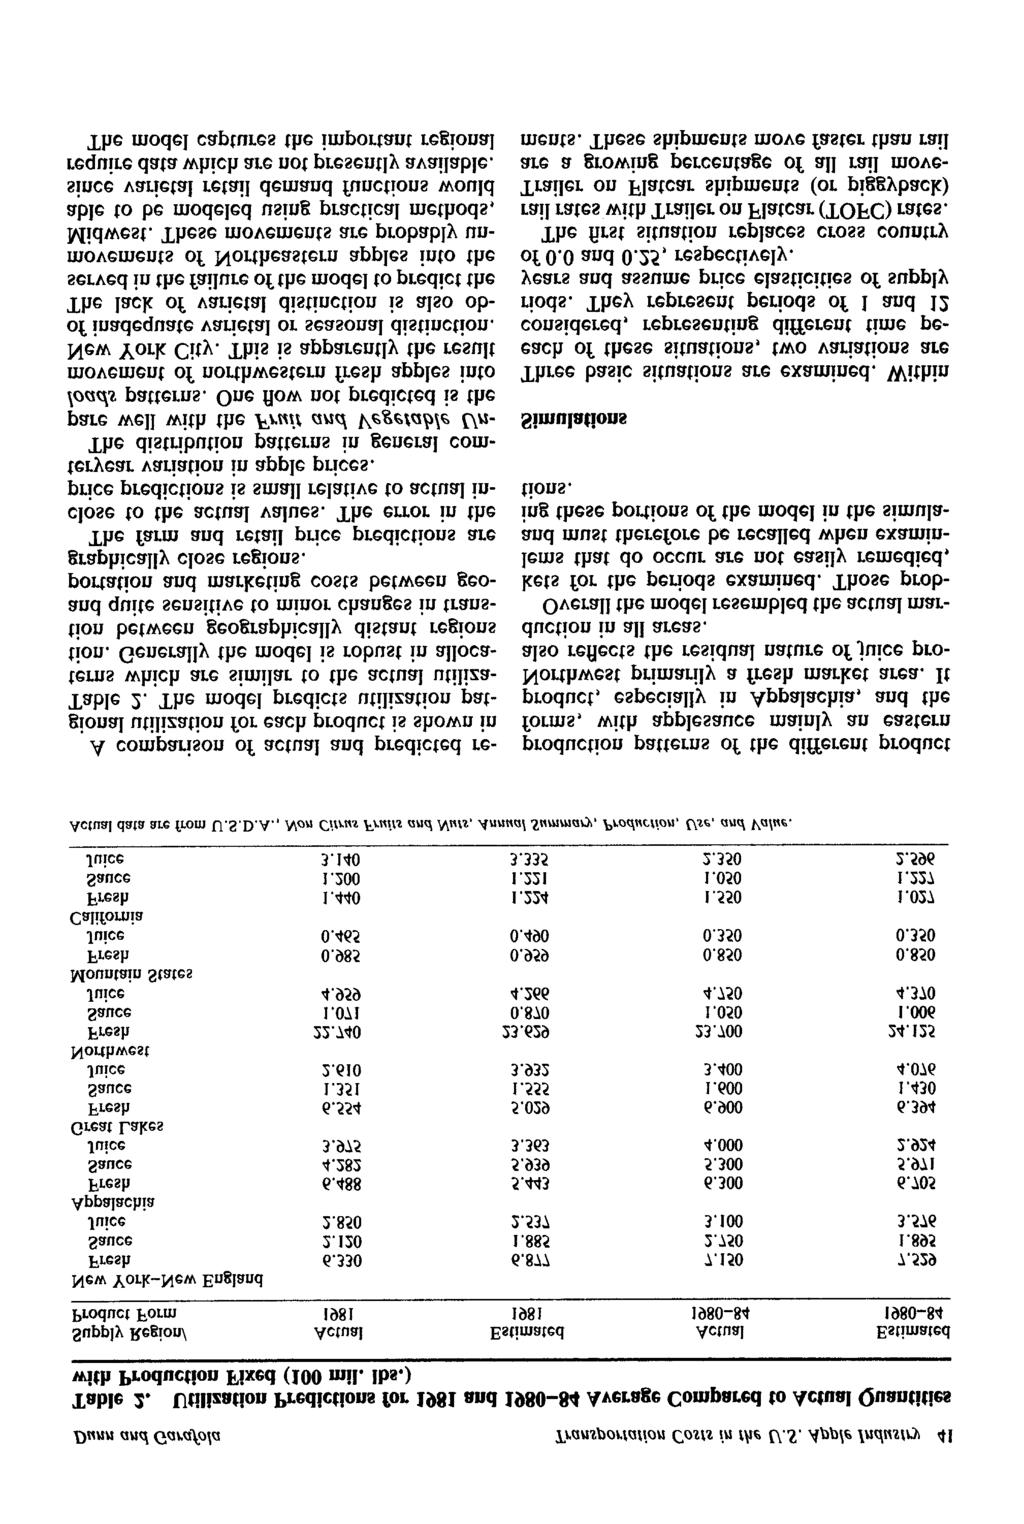 Dunn and Garafola Transporta~ionCosts in the U.S. Apple Industry 41 Table 2. Utilization Predictions for 1981 and 198-84 Average Compared to Actual Quantities with Production Fixed (1 roil. Ibs.